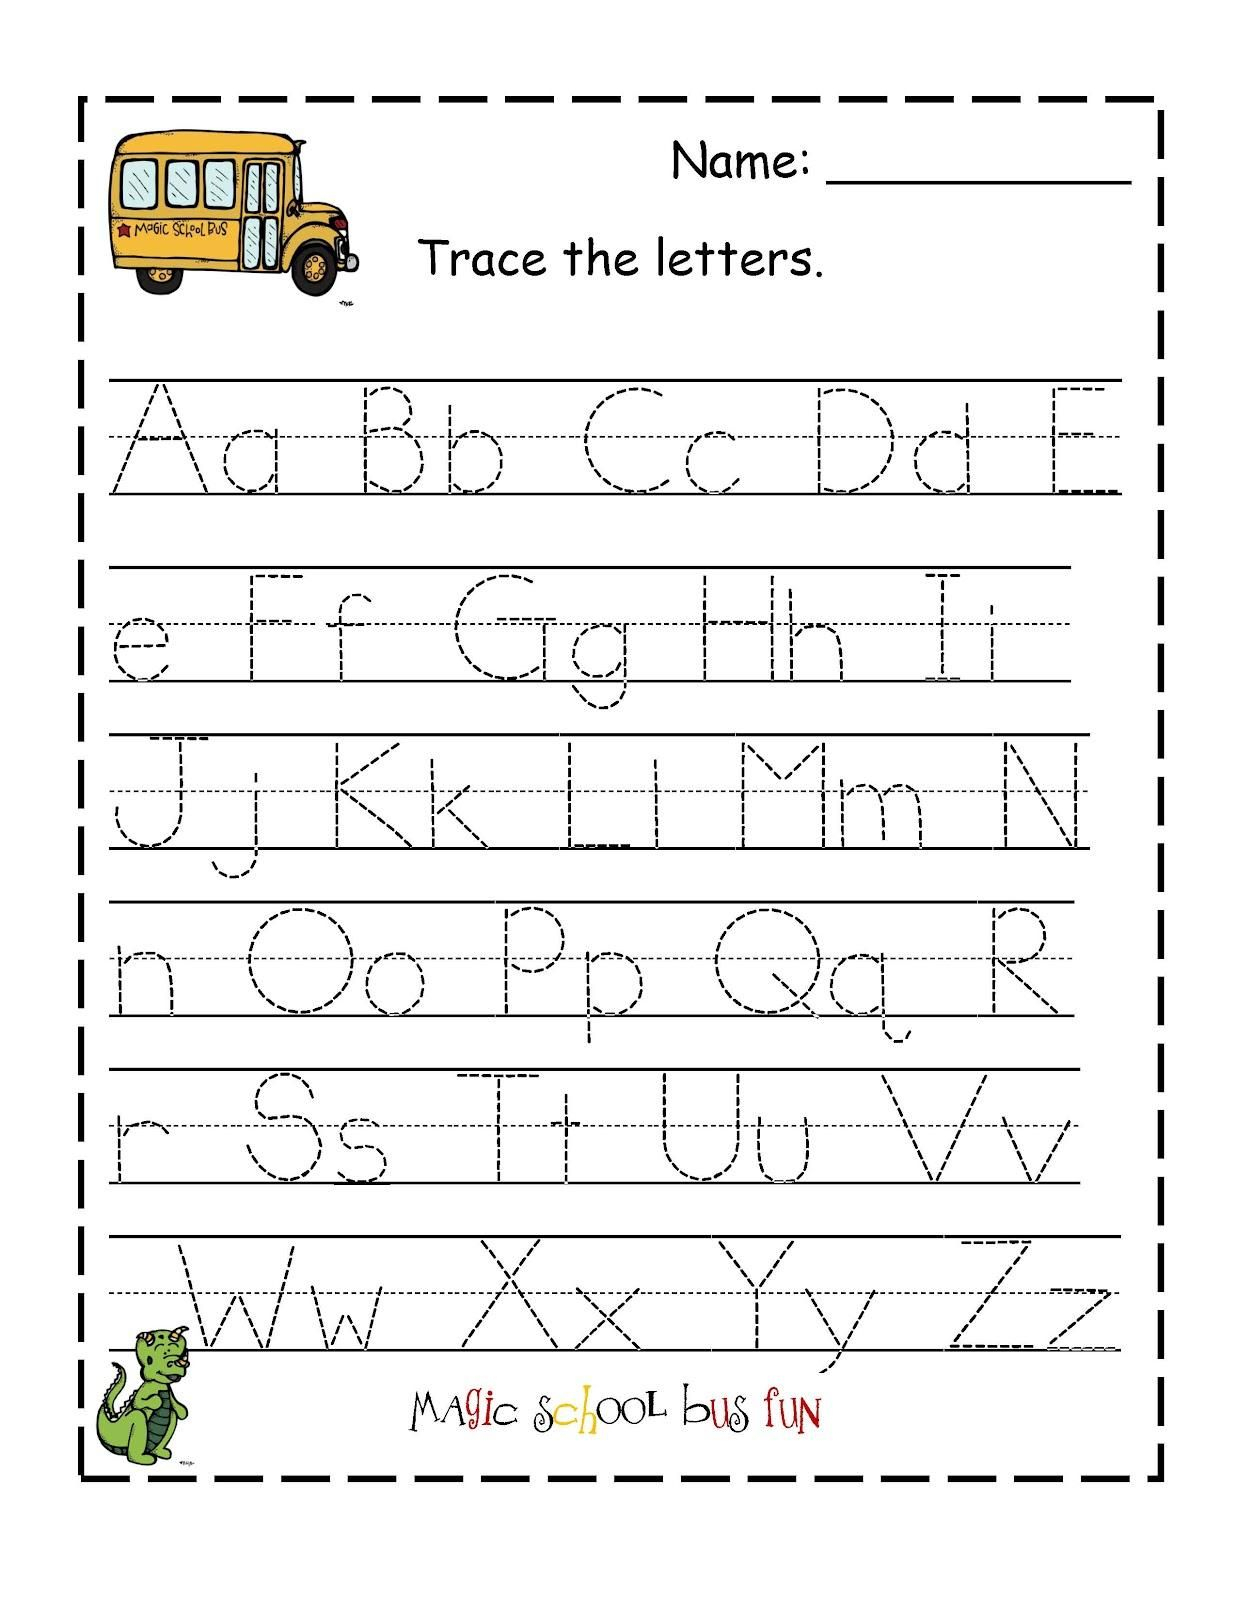 Alphabet Worksheets For 4 Year Olds In 2020 | Alphabet within Alphabet Tracing For 4 Year Old